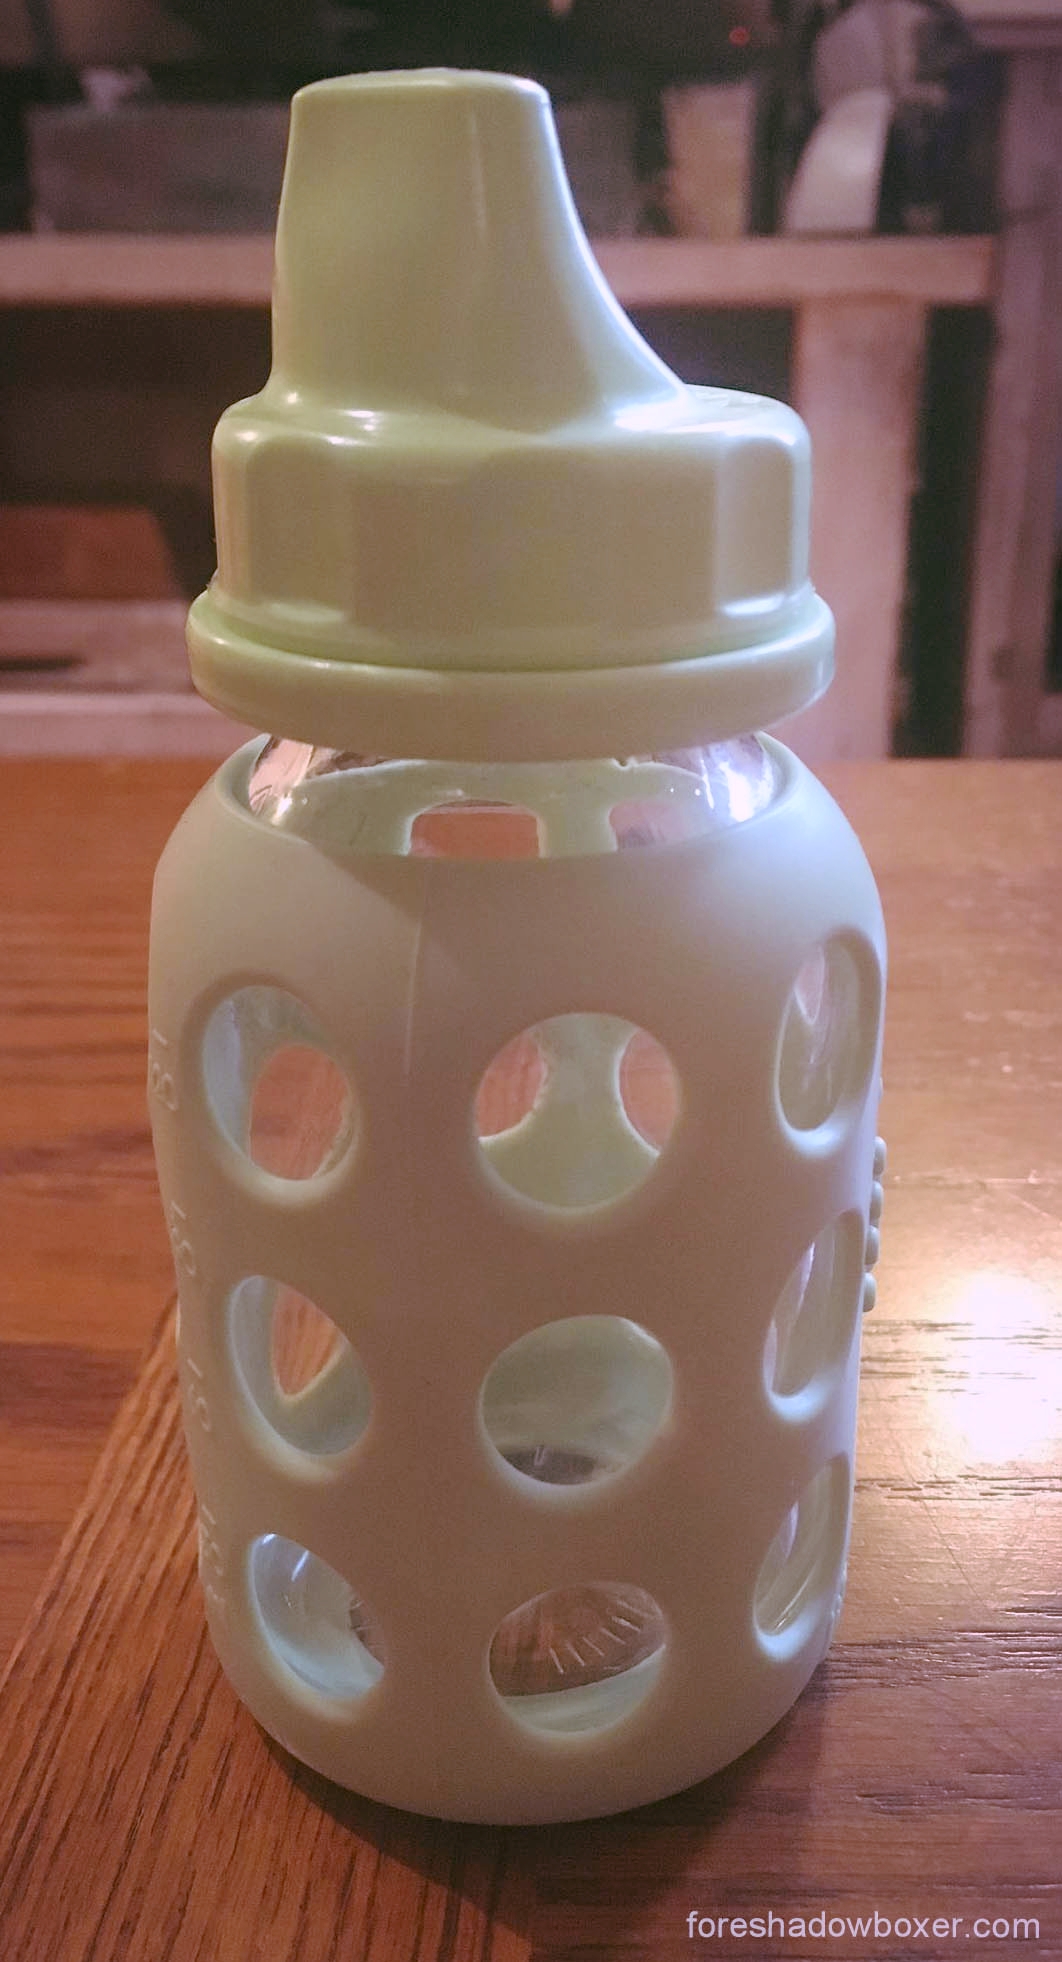  The Life Factory sippy cup adapters are a step in the right direction, but their plastic design undermines the reason you probably chose glass in the first place.  